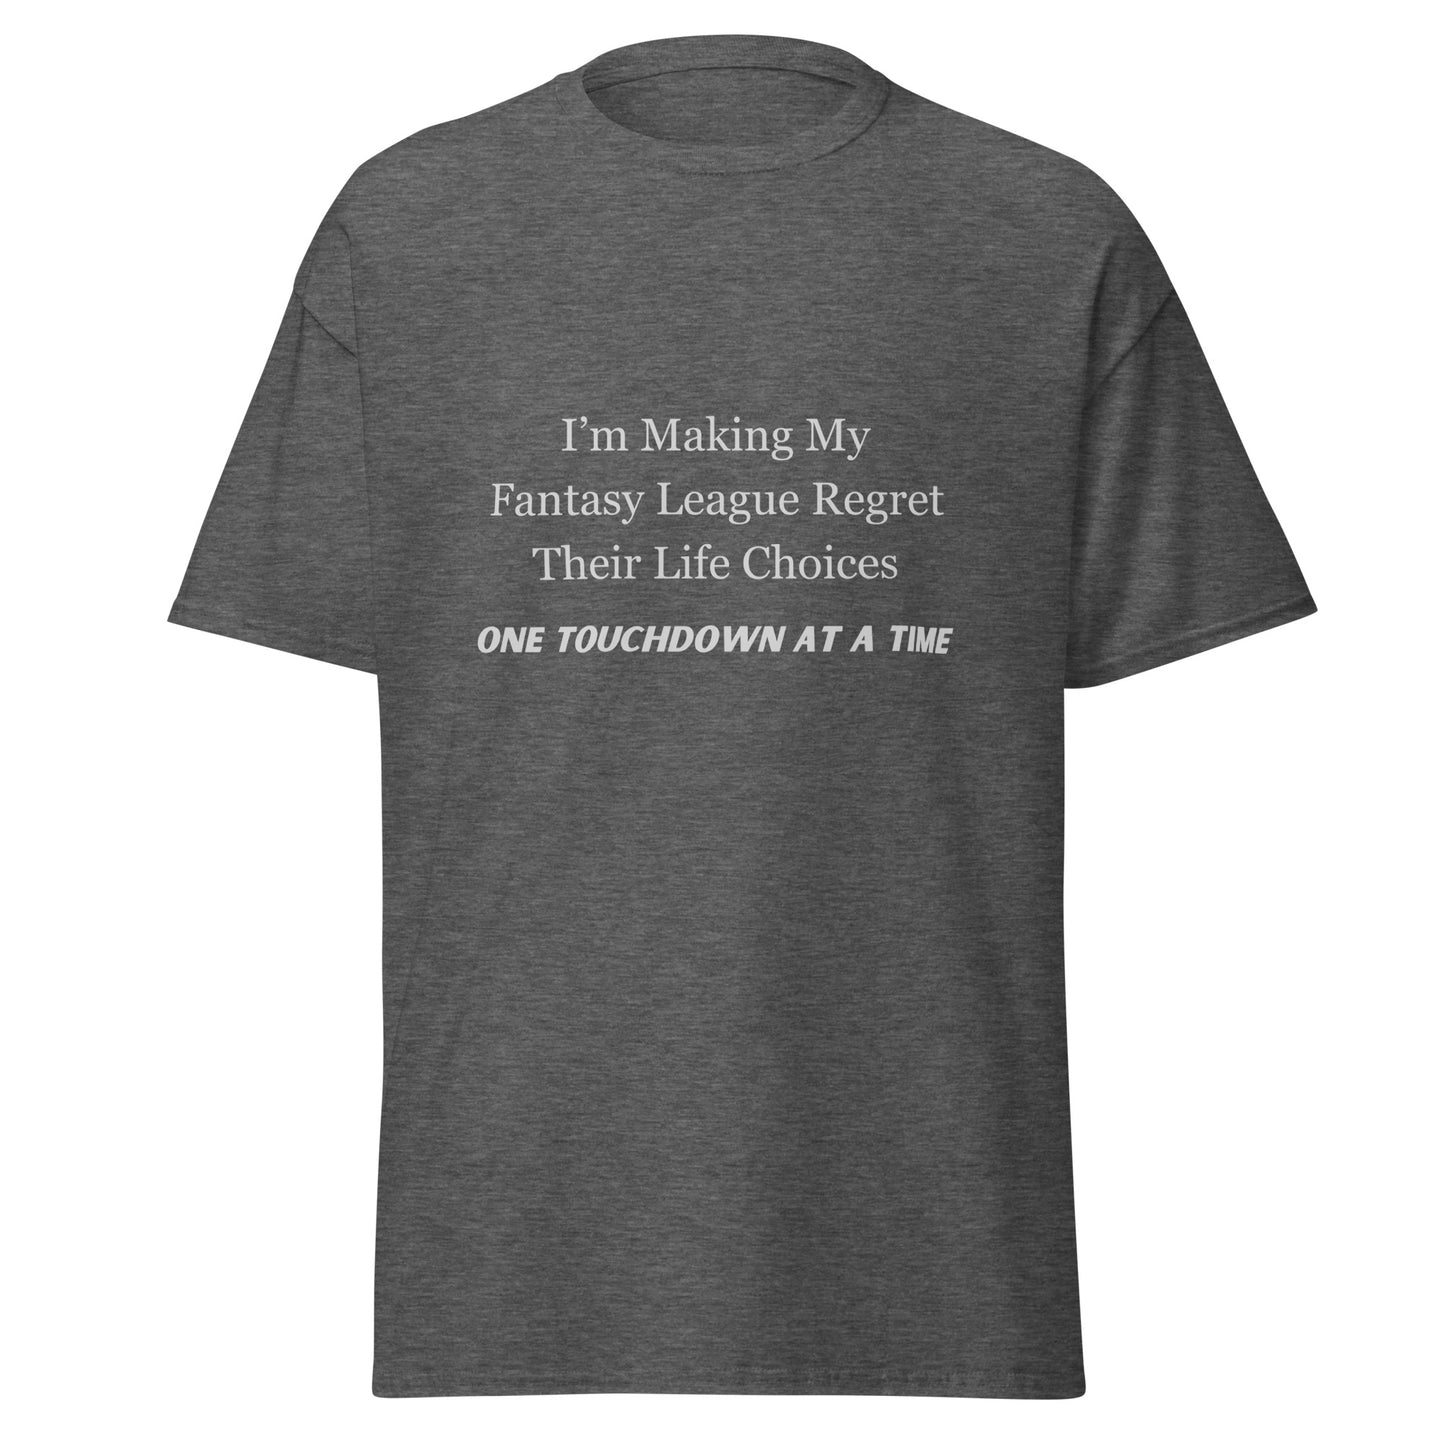 One Touchdown - Men's classic tee